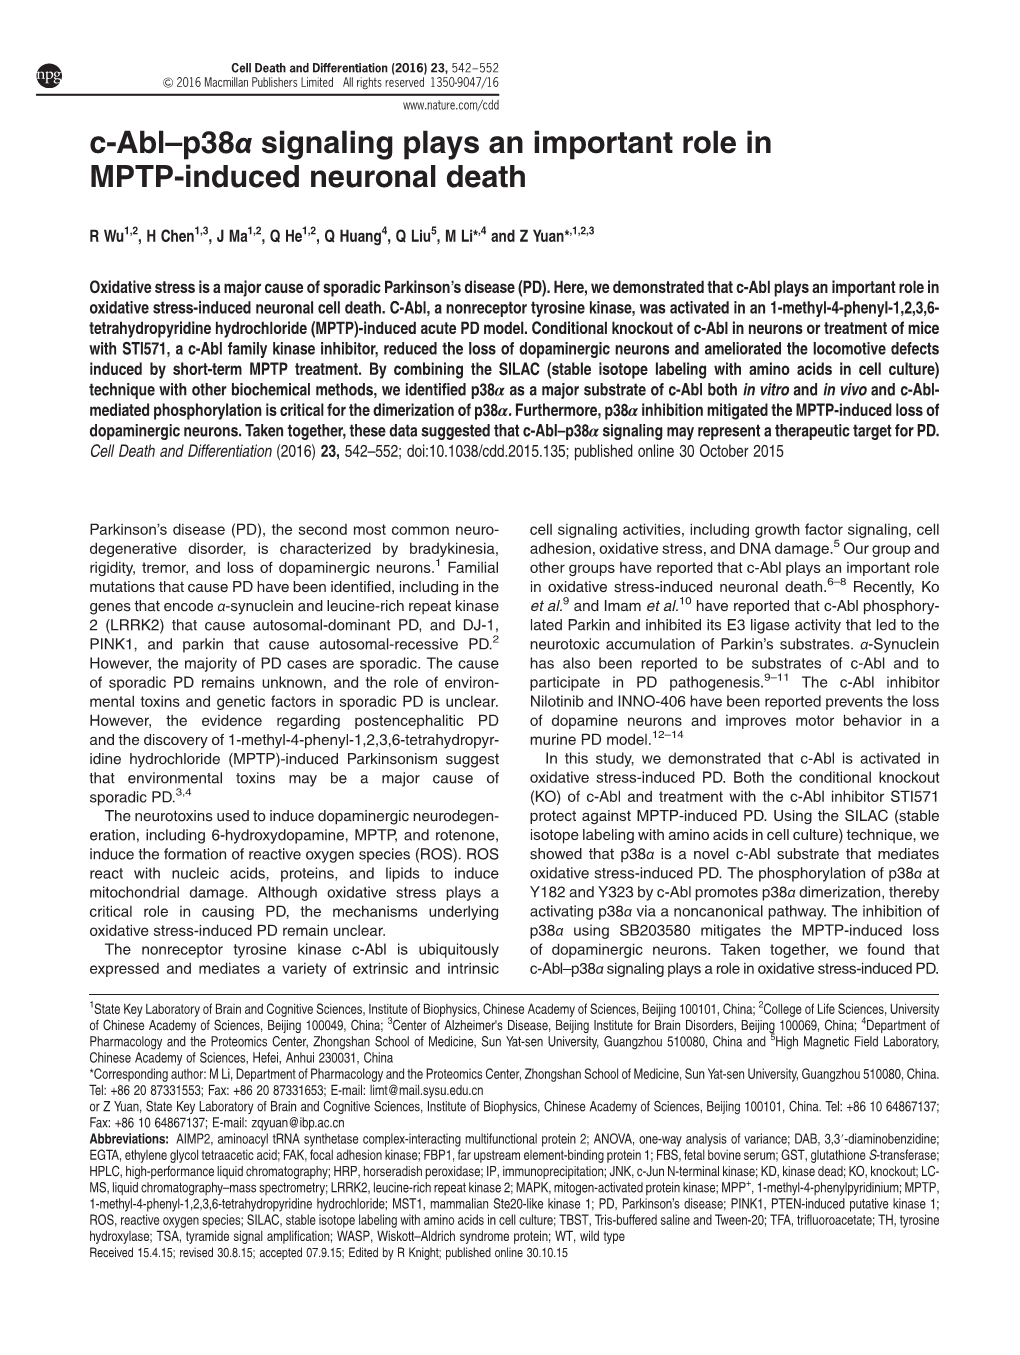 Signaling Plays an Important Role in MPTP-Induced Neuronal Death